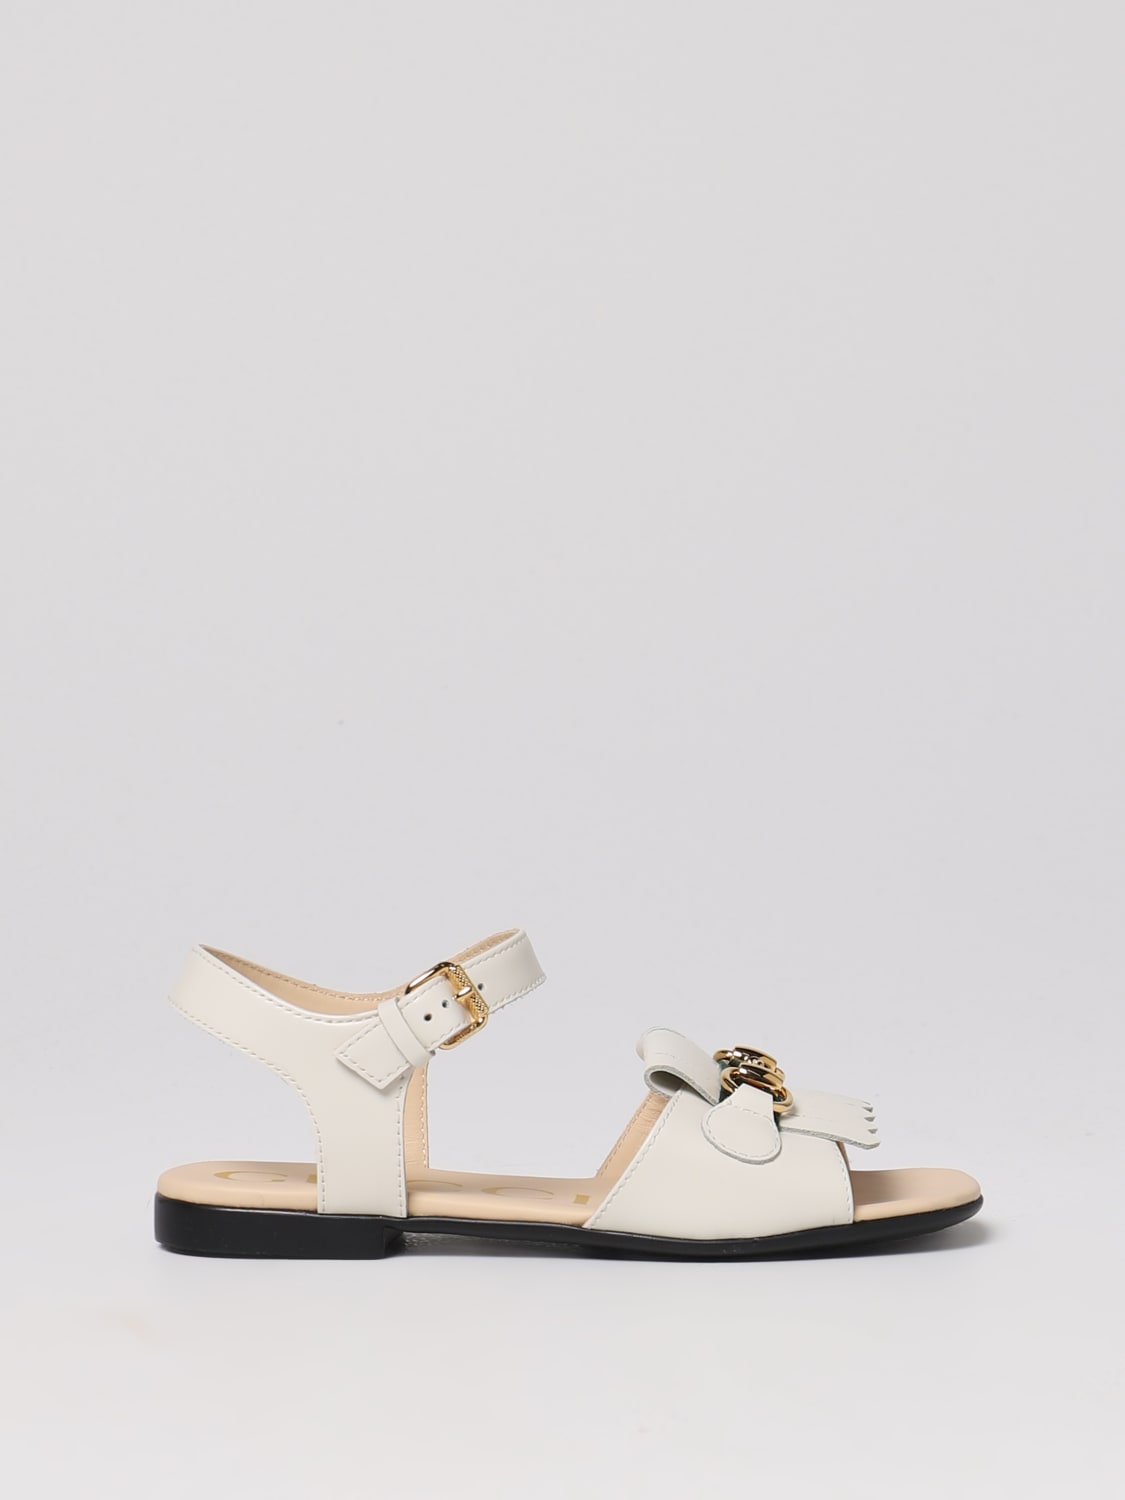 Sociologi spejder Labe GUCCI: sandal in brushed leather - White | Gucci shoes 725766AABF0 online  on GIGLIO.COM